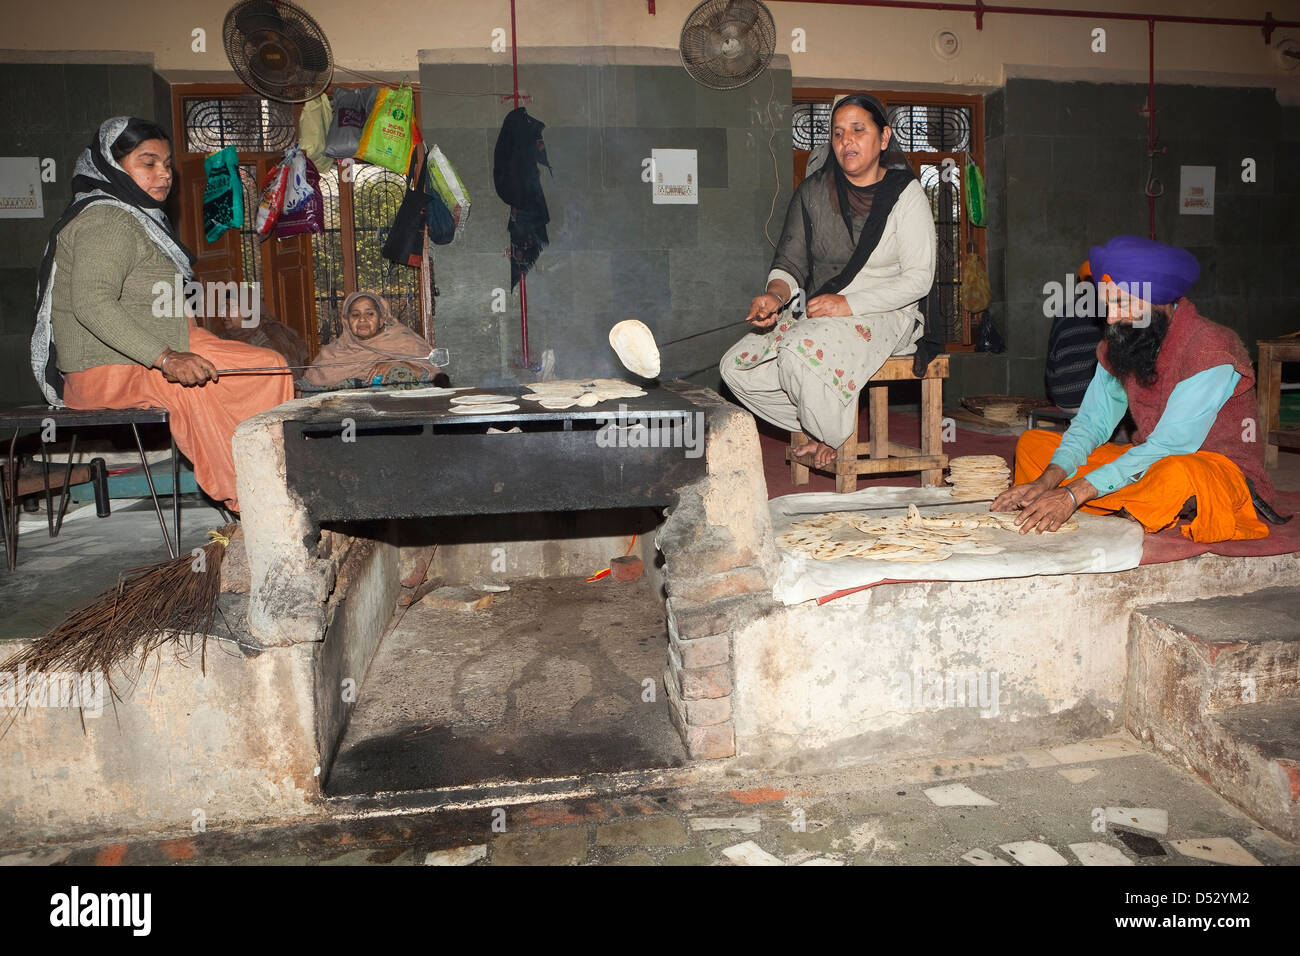 Volunteers cooking chapattis inside the kitchens of the Golden Temple complex in Amritsar, Punjab, India. Stock Photo